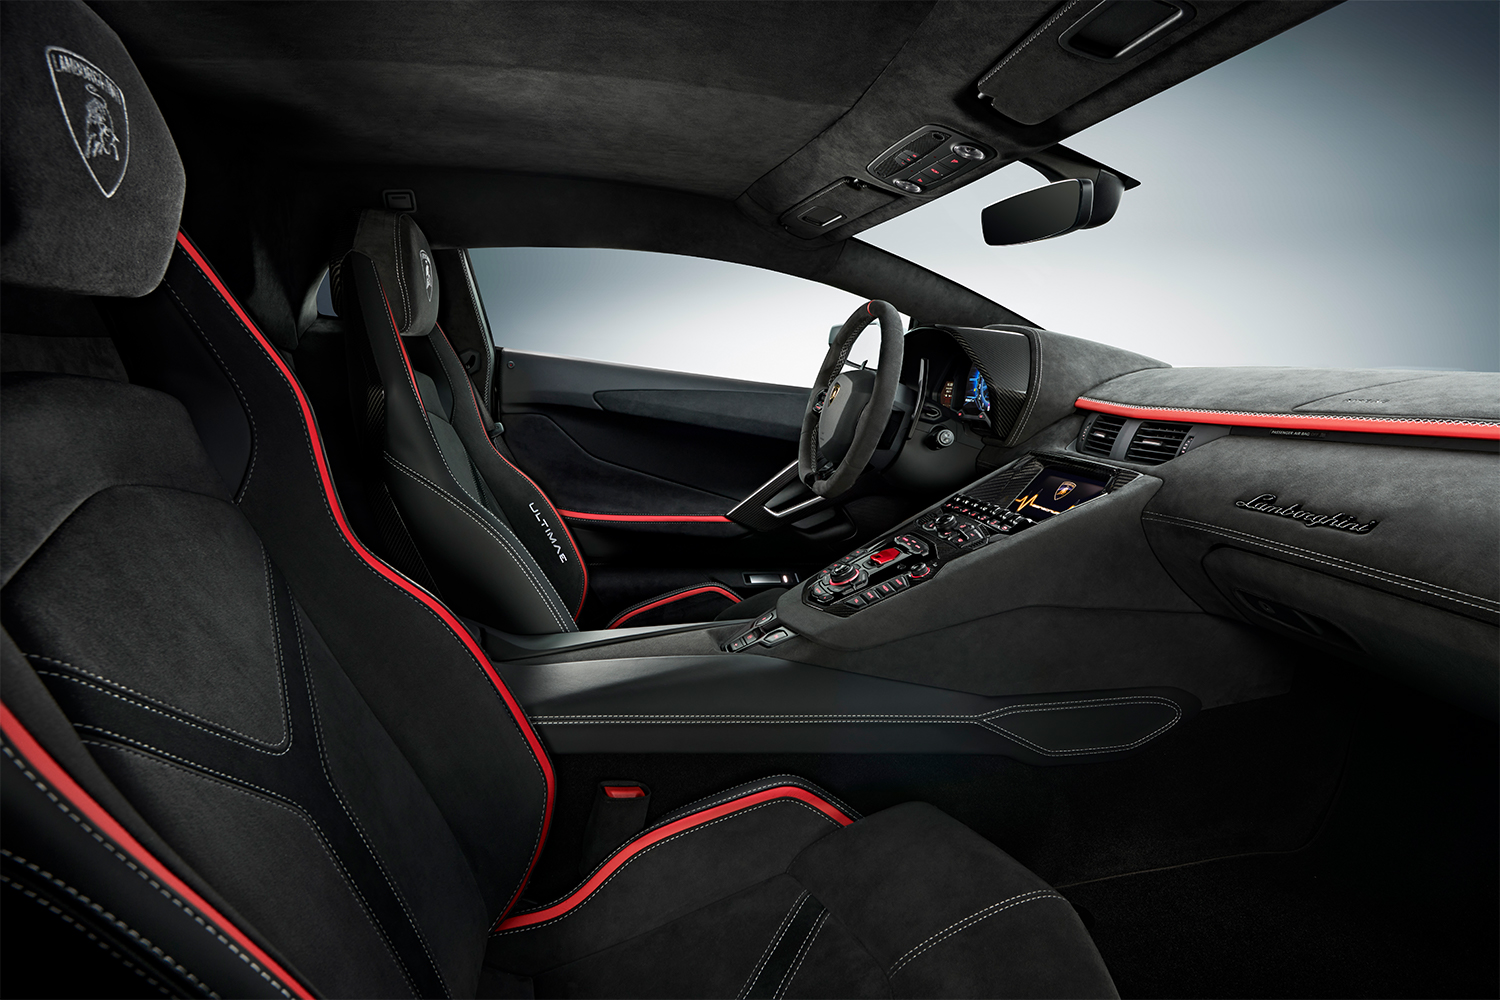 The interior of a Lamborghini Aventador Ultimae, with black seating outlined in red accents